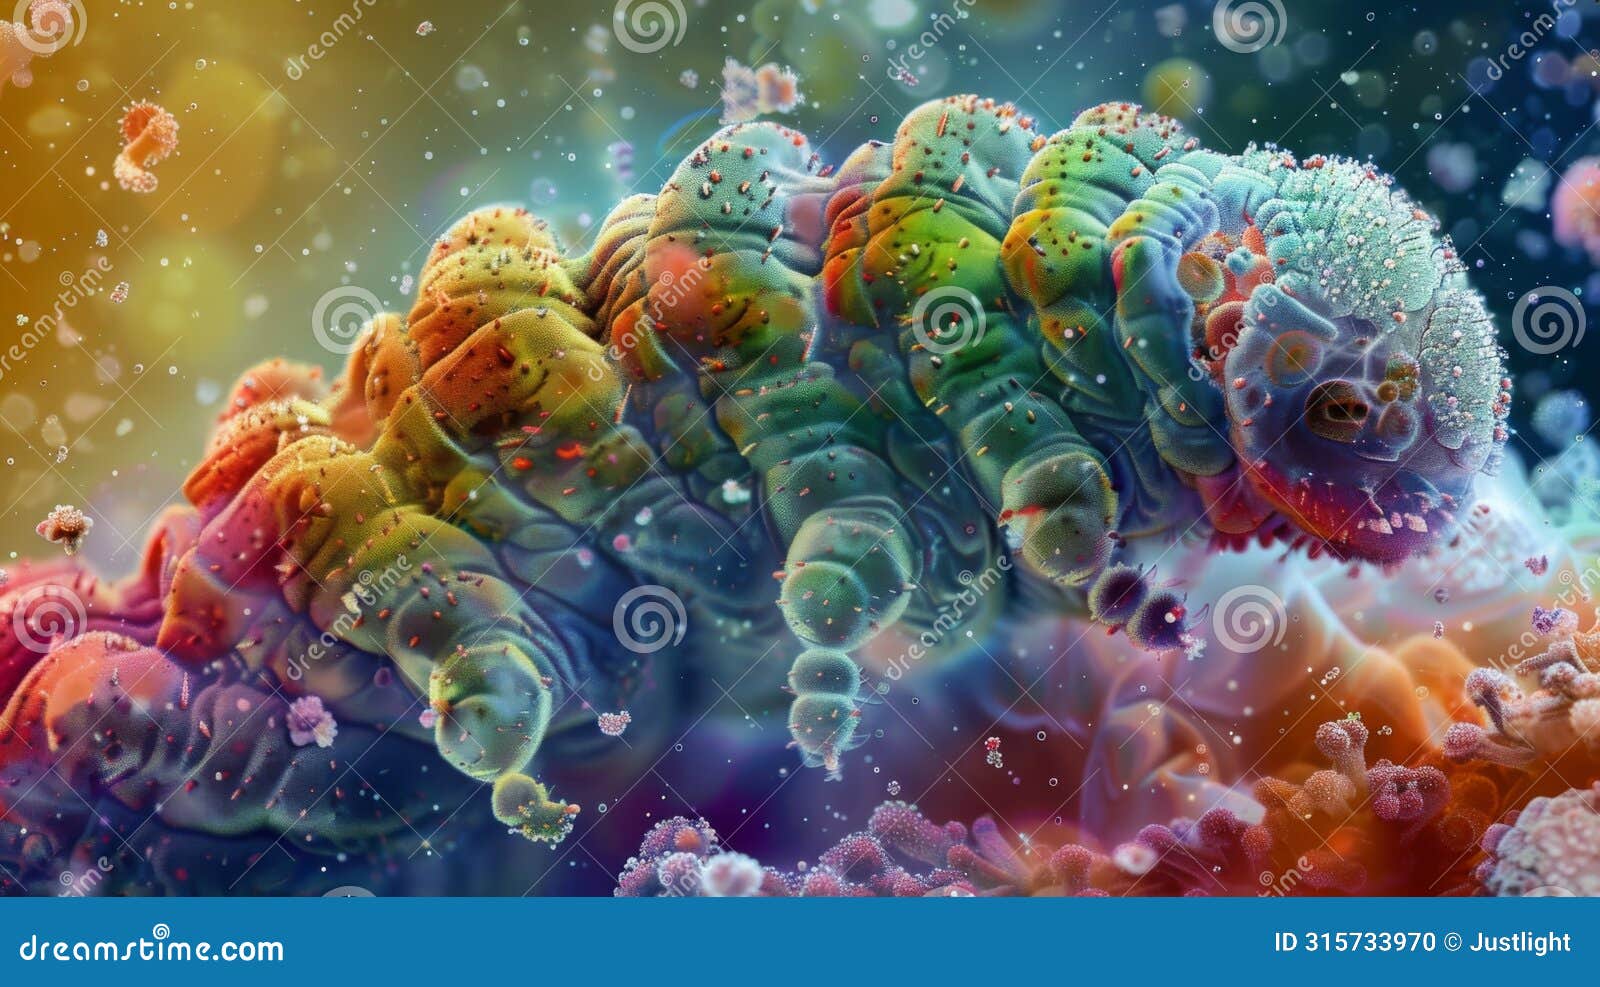 a colorful image of a tardigrade engulfed in a mass of tiny organisms forming a symbiotic relationship. the tardigrade